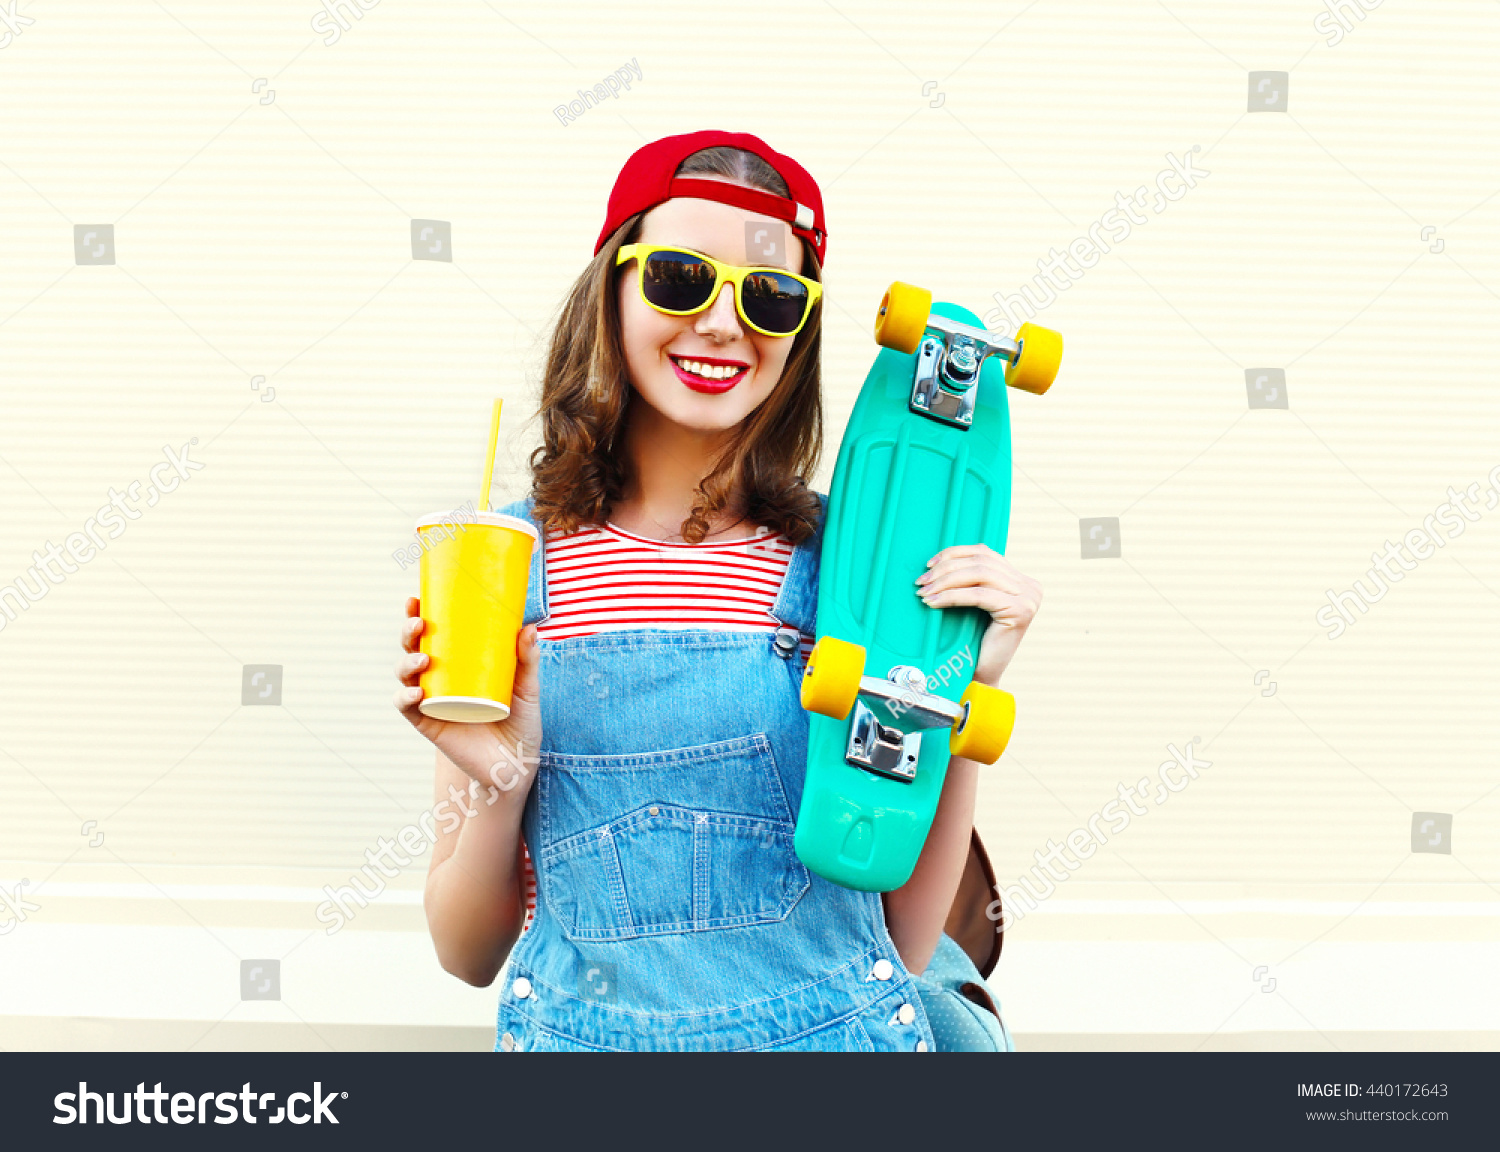 Happy Pretty Cool Smiling Woman With Cup And Skateboard Over White ...